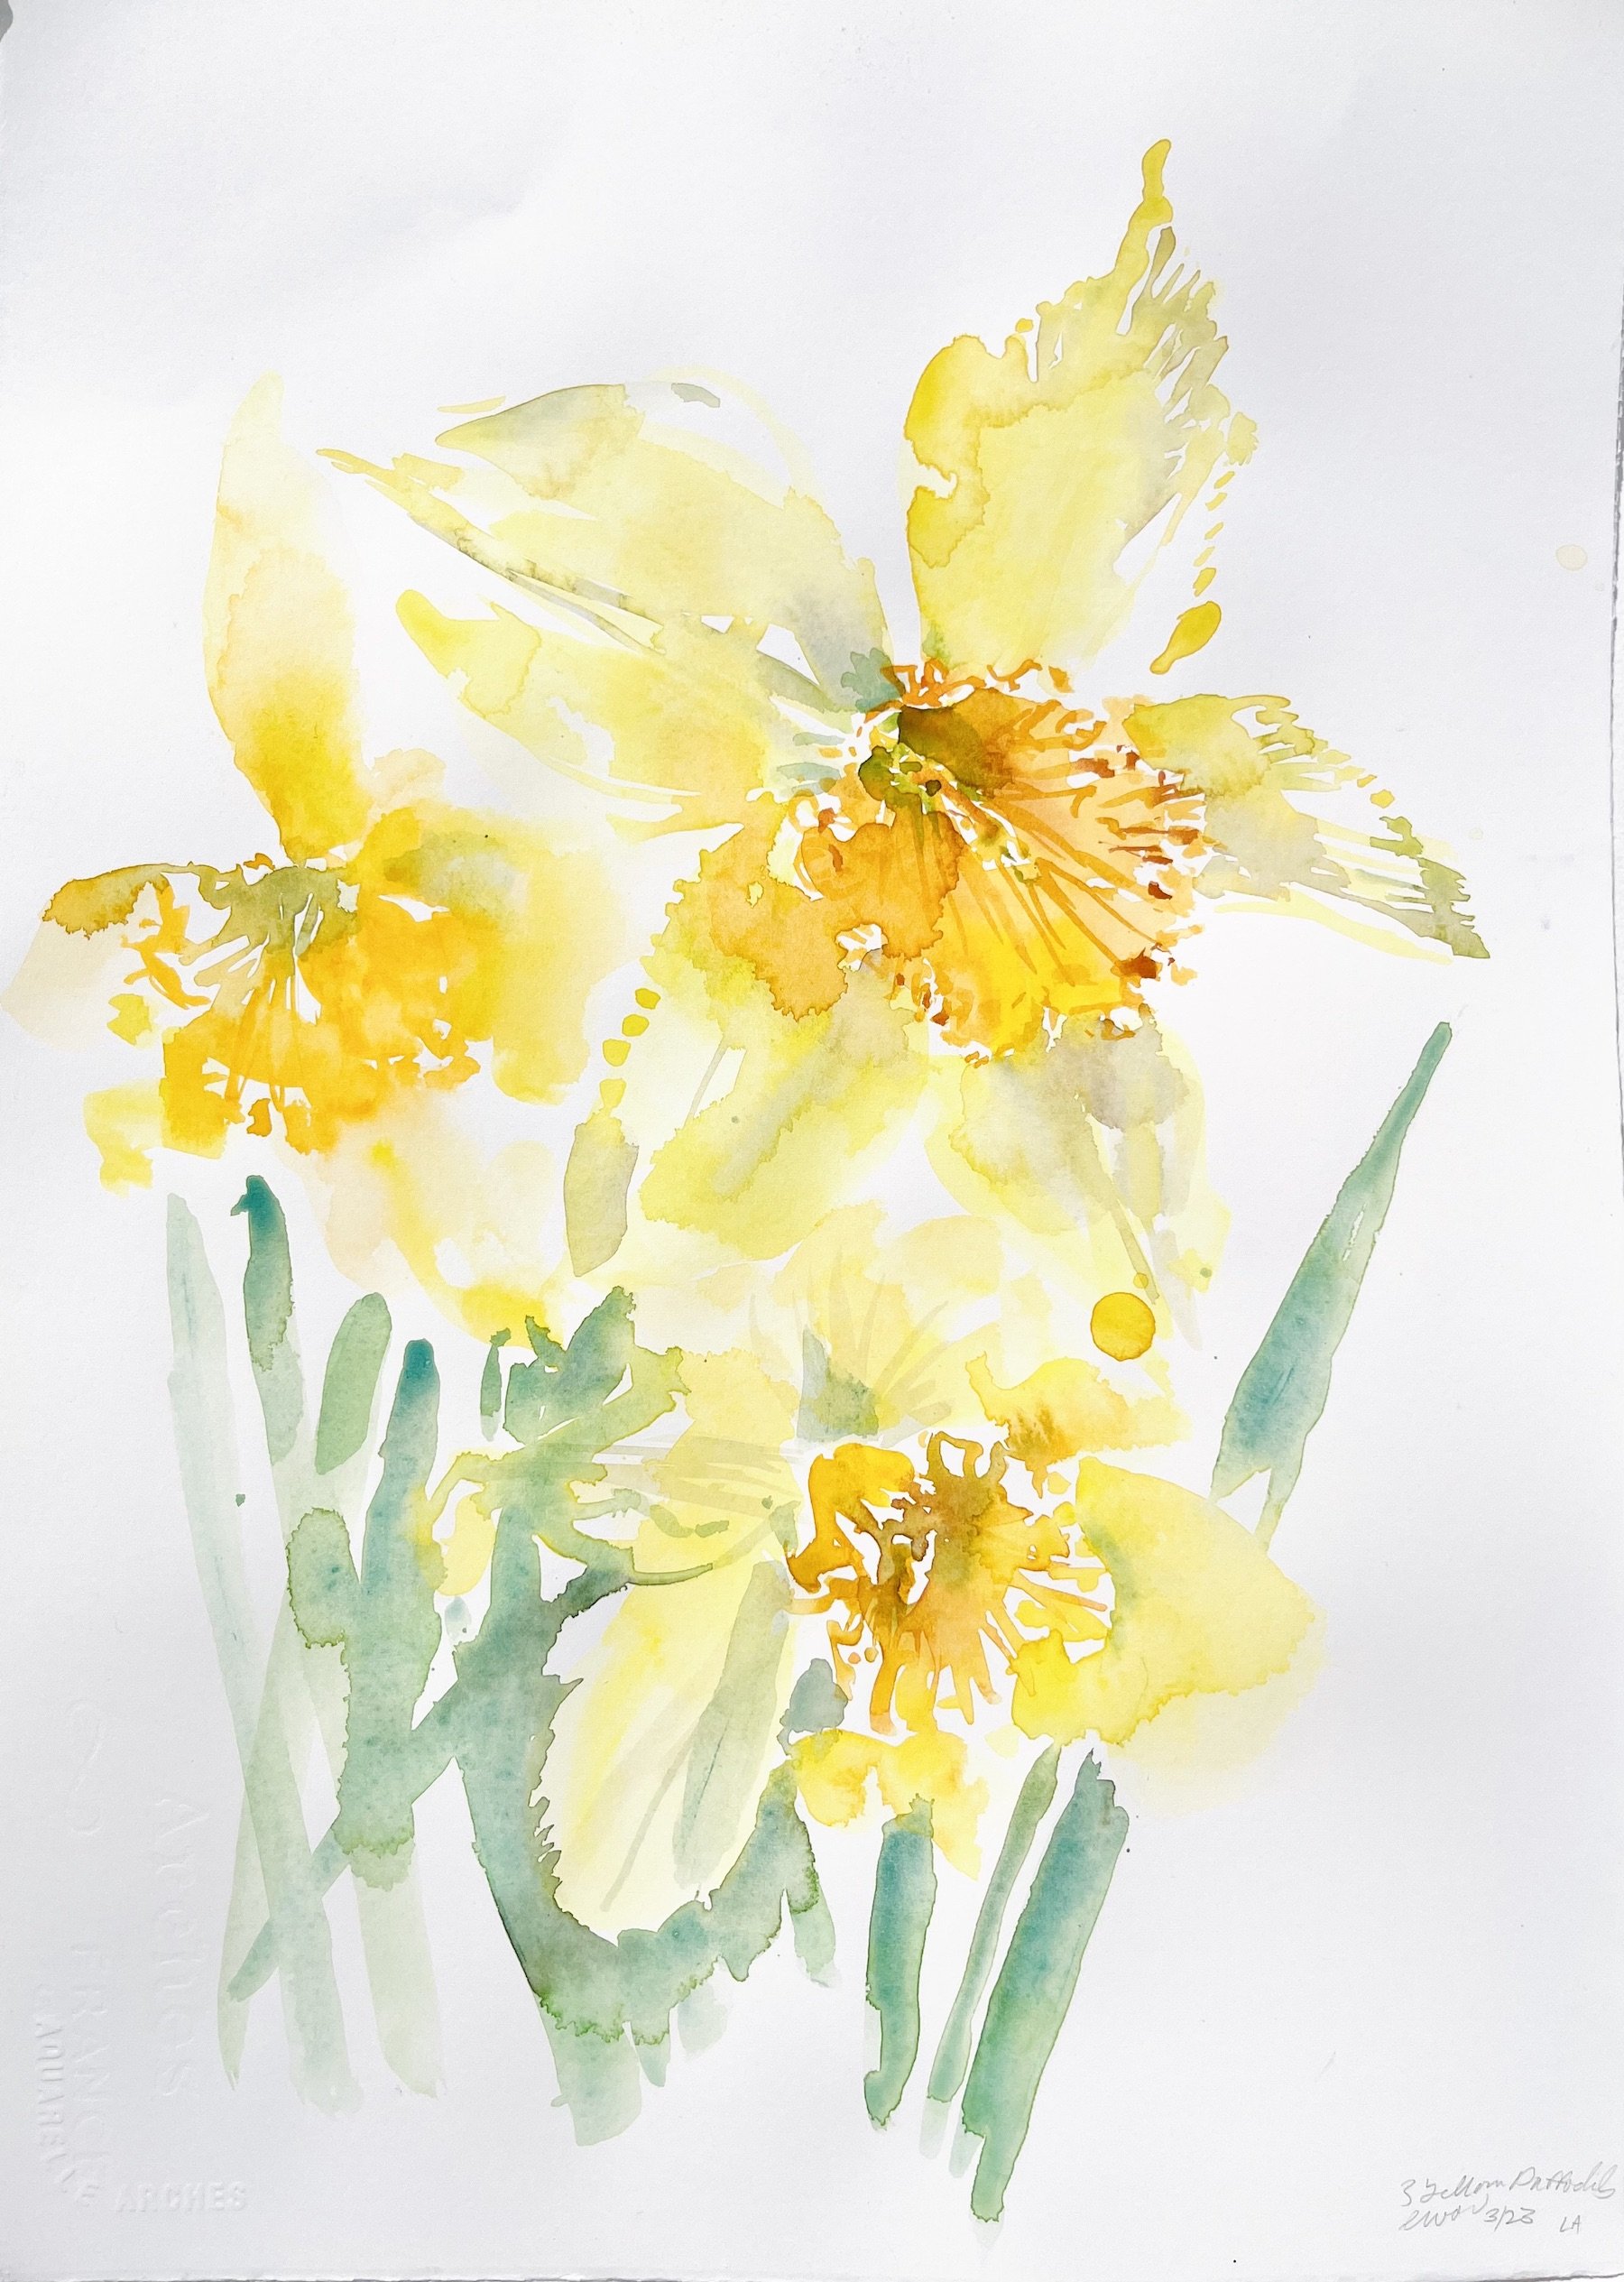    3 Yellow Daffodils  , 18” x 14”, watercolor on paper 